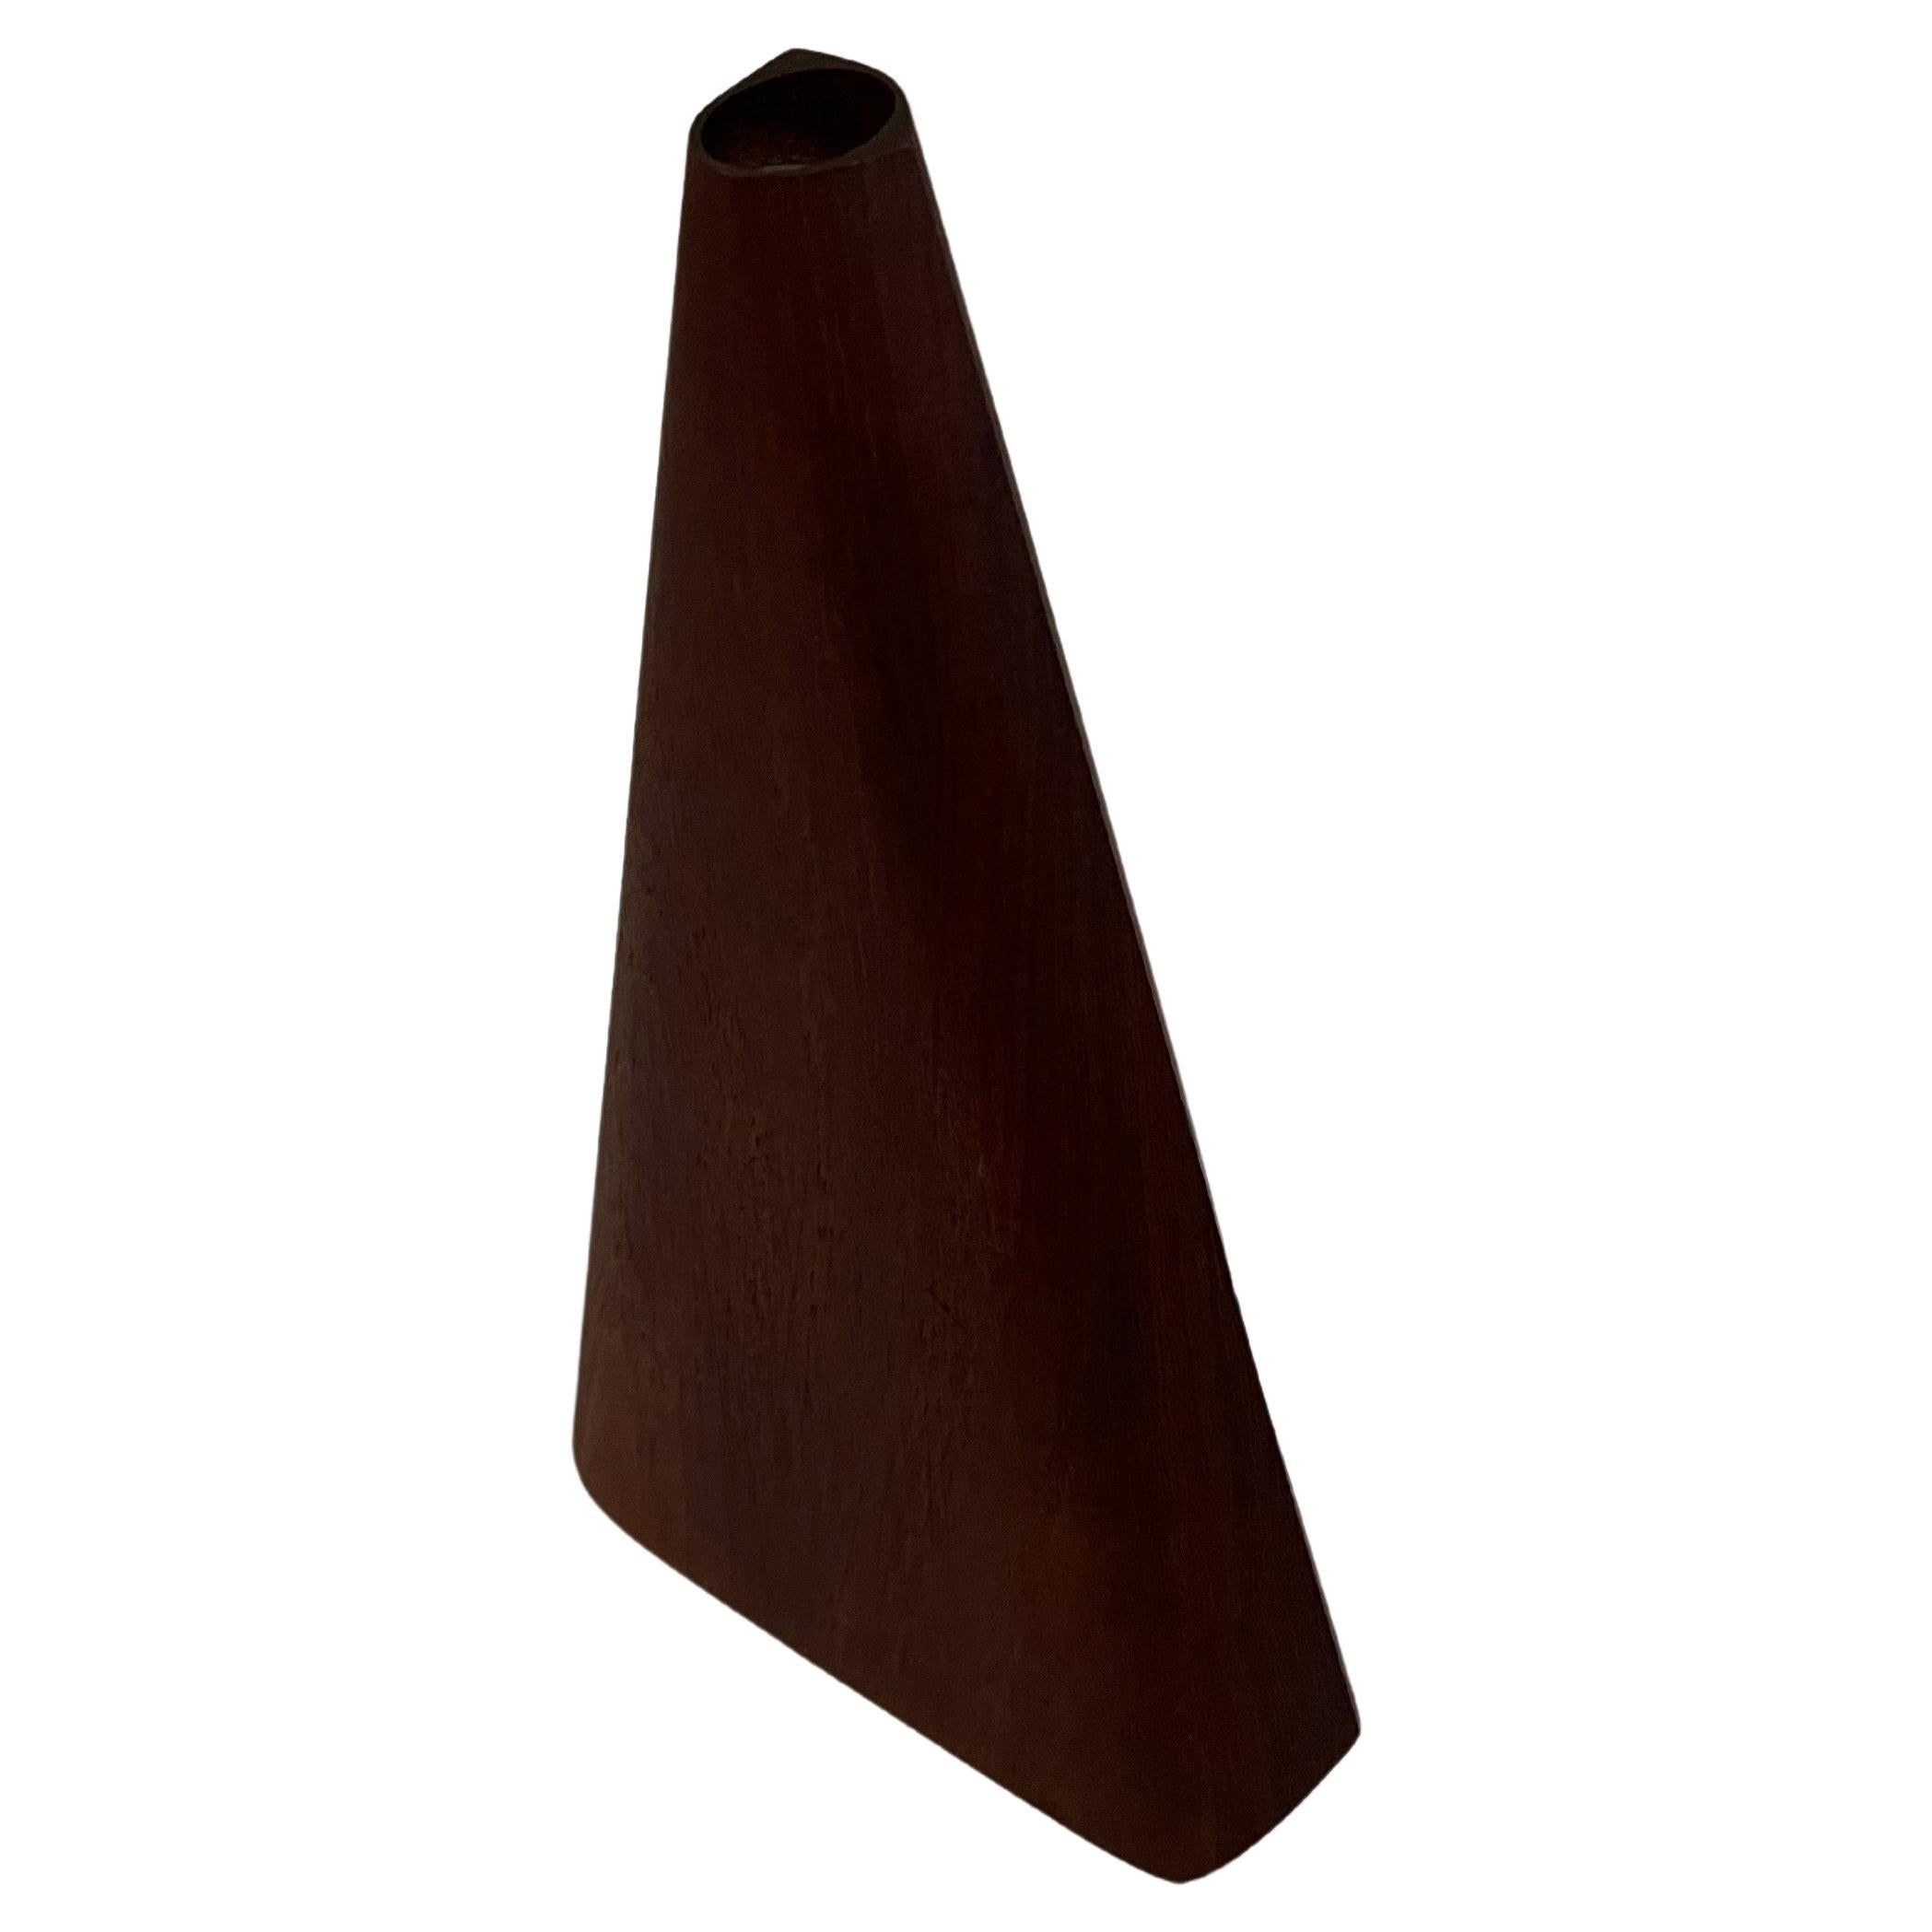 Danish Modern Solid Teak Geometric Freeform Vase In Excellent Condition For Sale In San Diego, CA